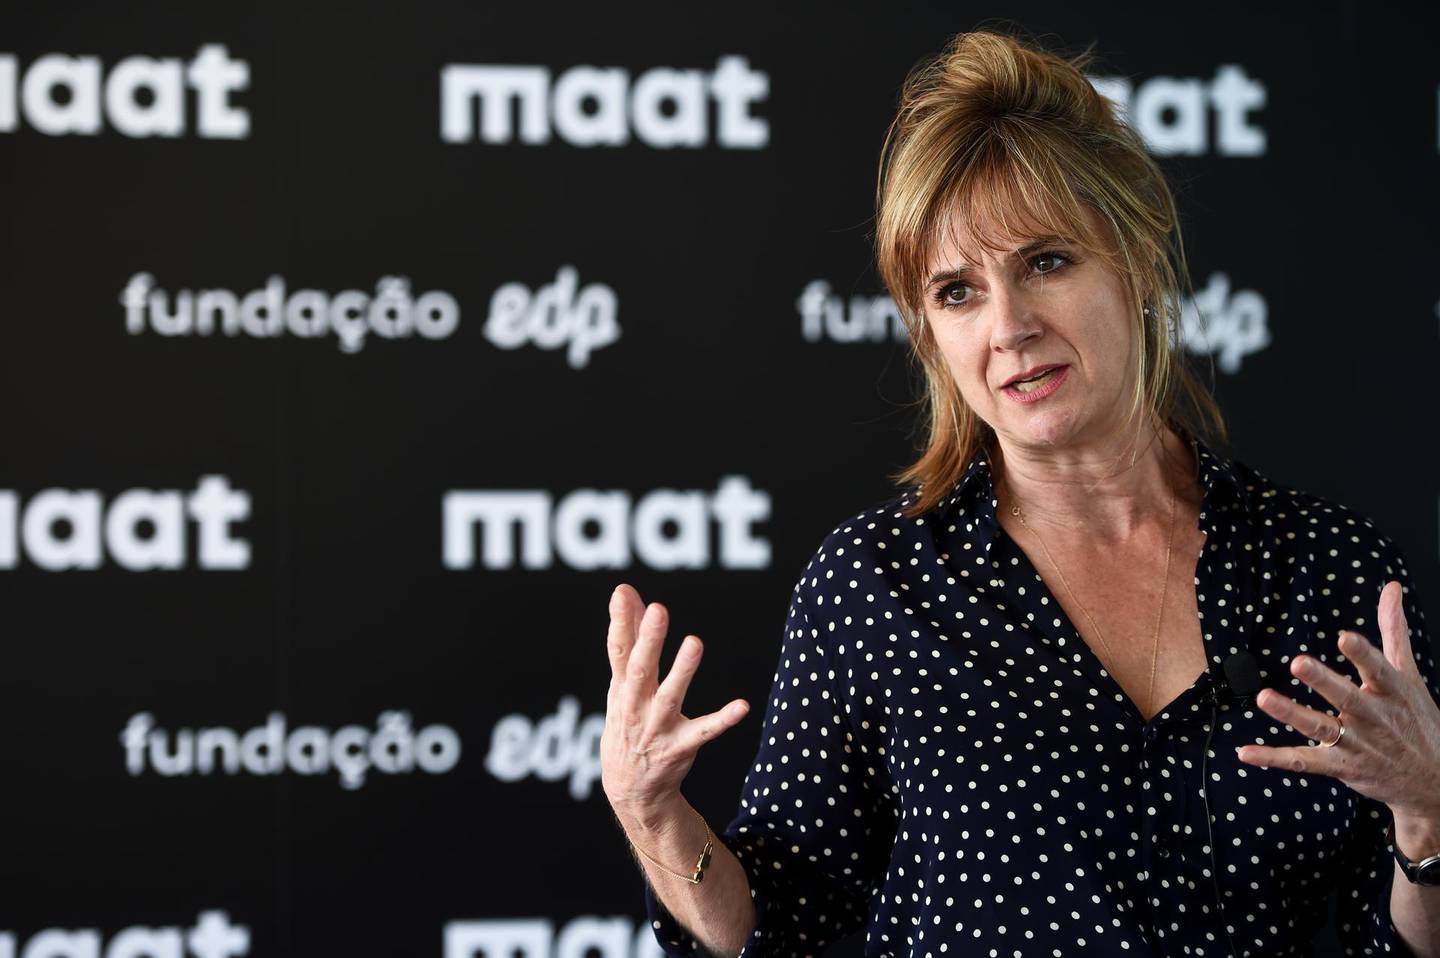 The architect of the MAAT museum ((Museum of Art, Architecture and Technology) Amanda Levete gives a press conference during a boat ride on the Tagus River in Lisbon on October 3, 2016. - The MAAT museum will open for public on October 5, 2016. (Photo by PATRICIA DE MELO MOREIRA / AFP)